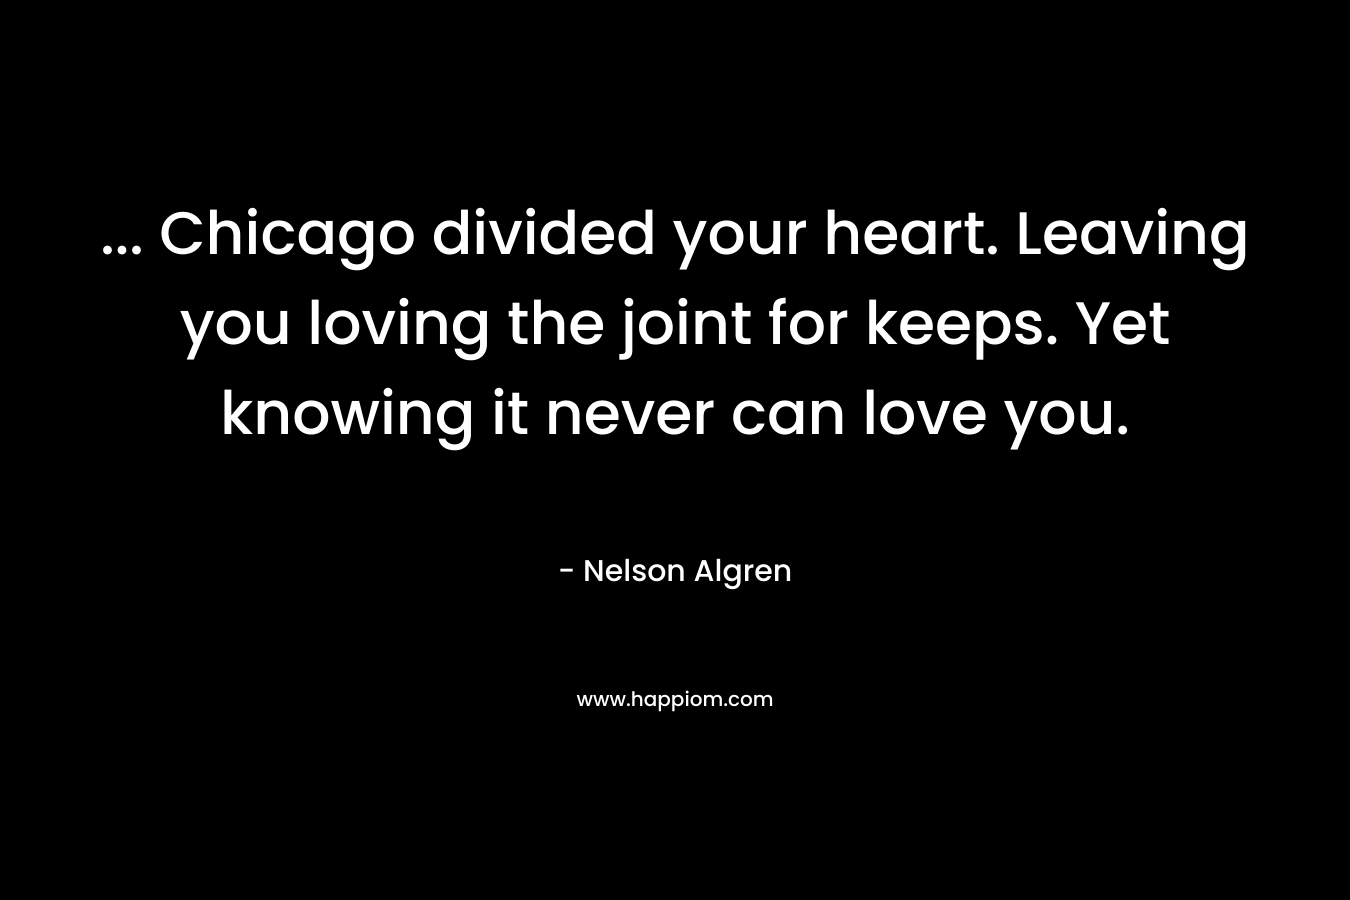 ... Chicago divided your heart. Leaving you loving the joint for keeps. Yet knowing it never can love you.